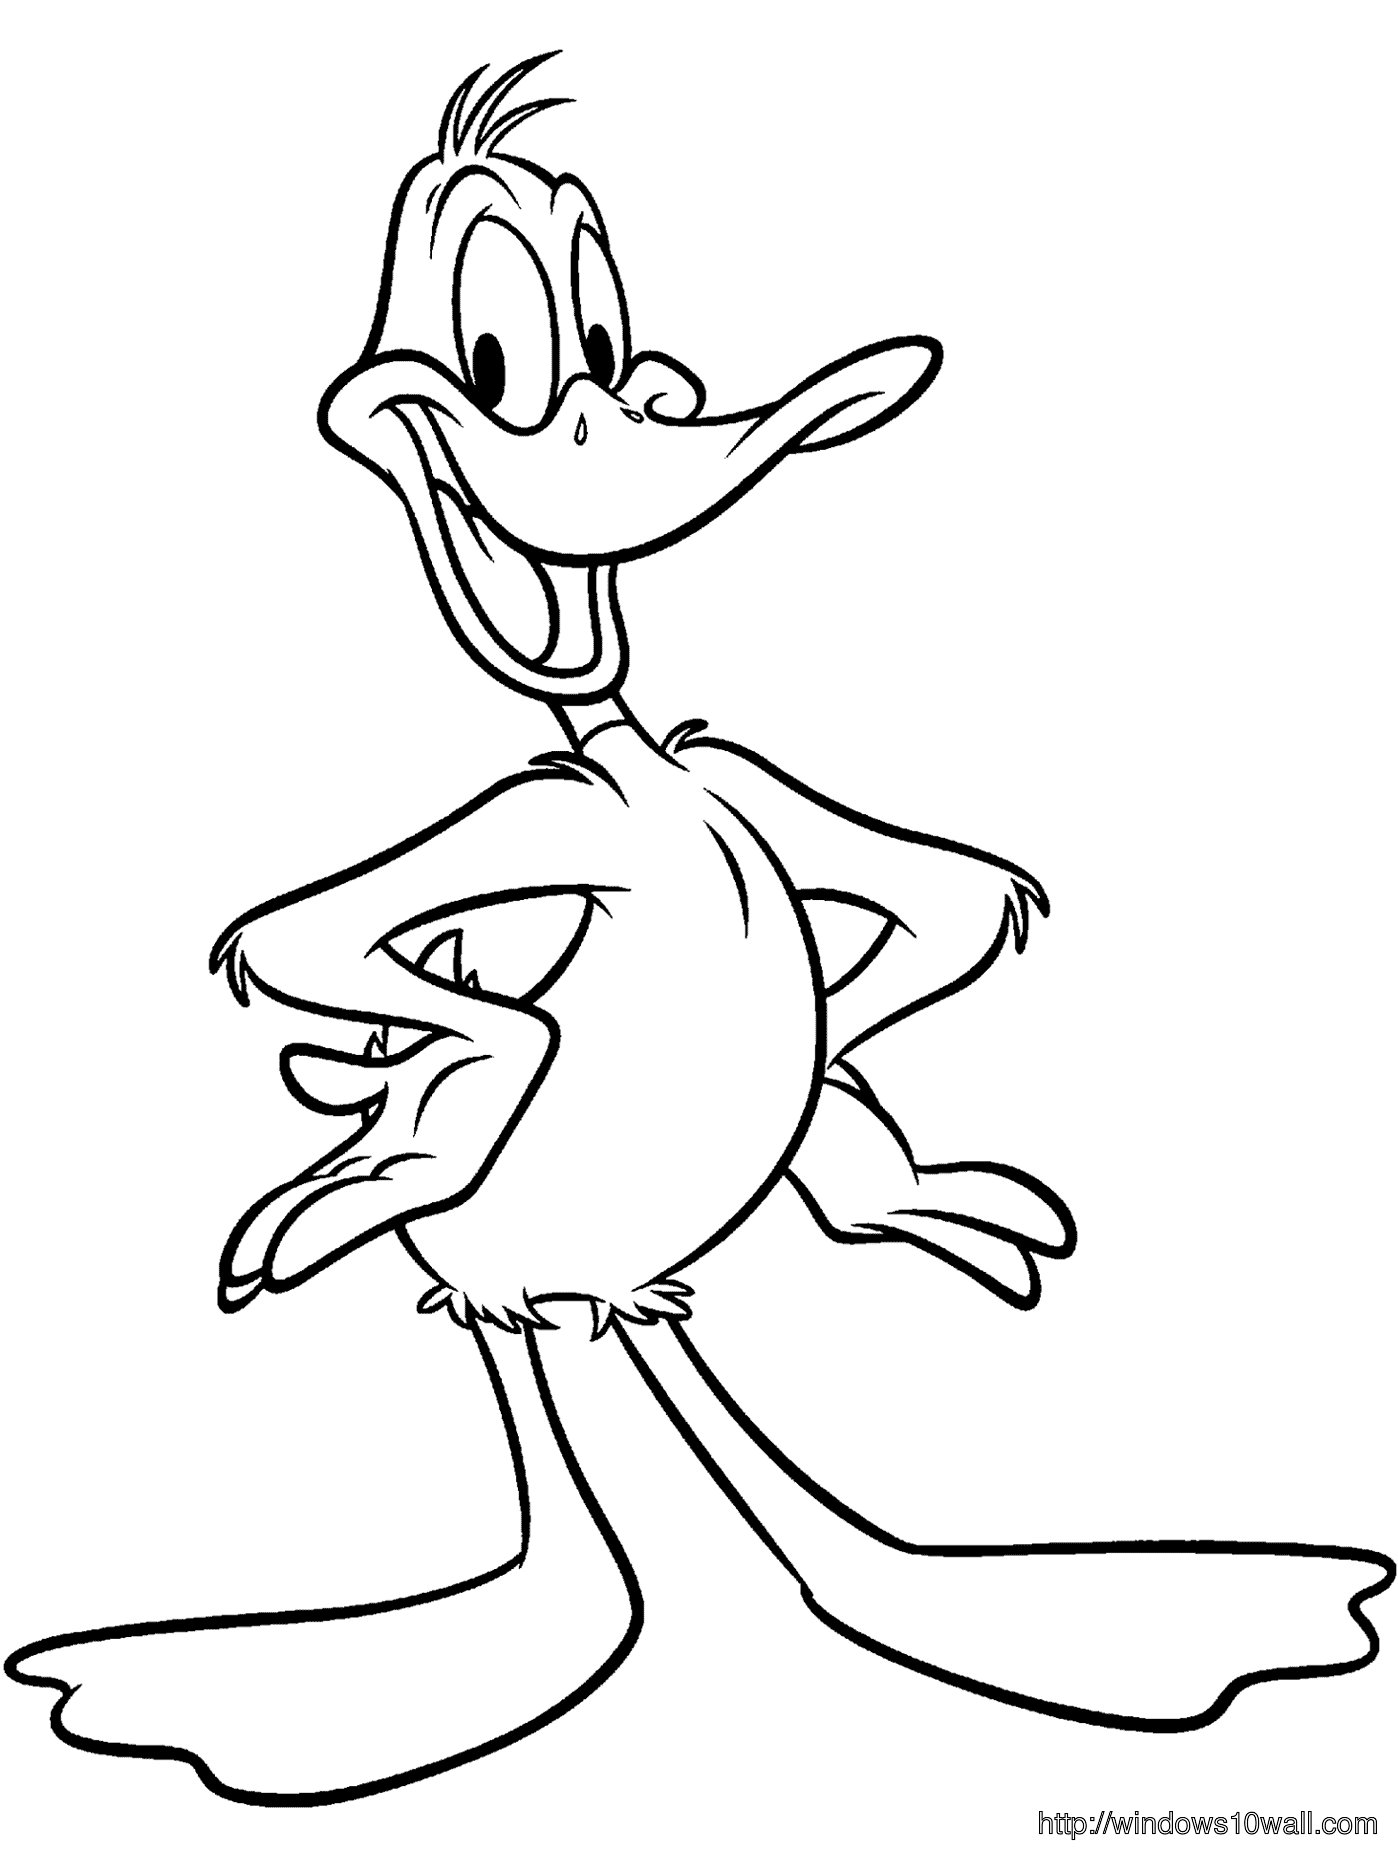 Daffy duck Coloring Page for Kids Wallpaper